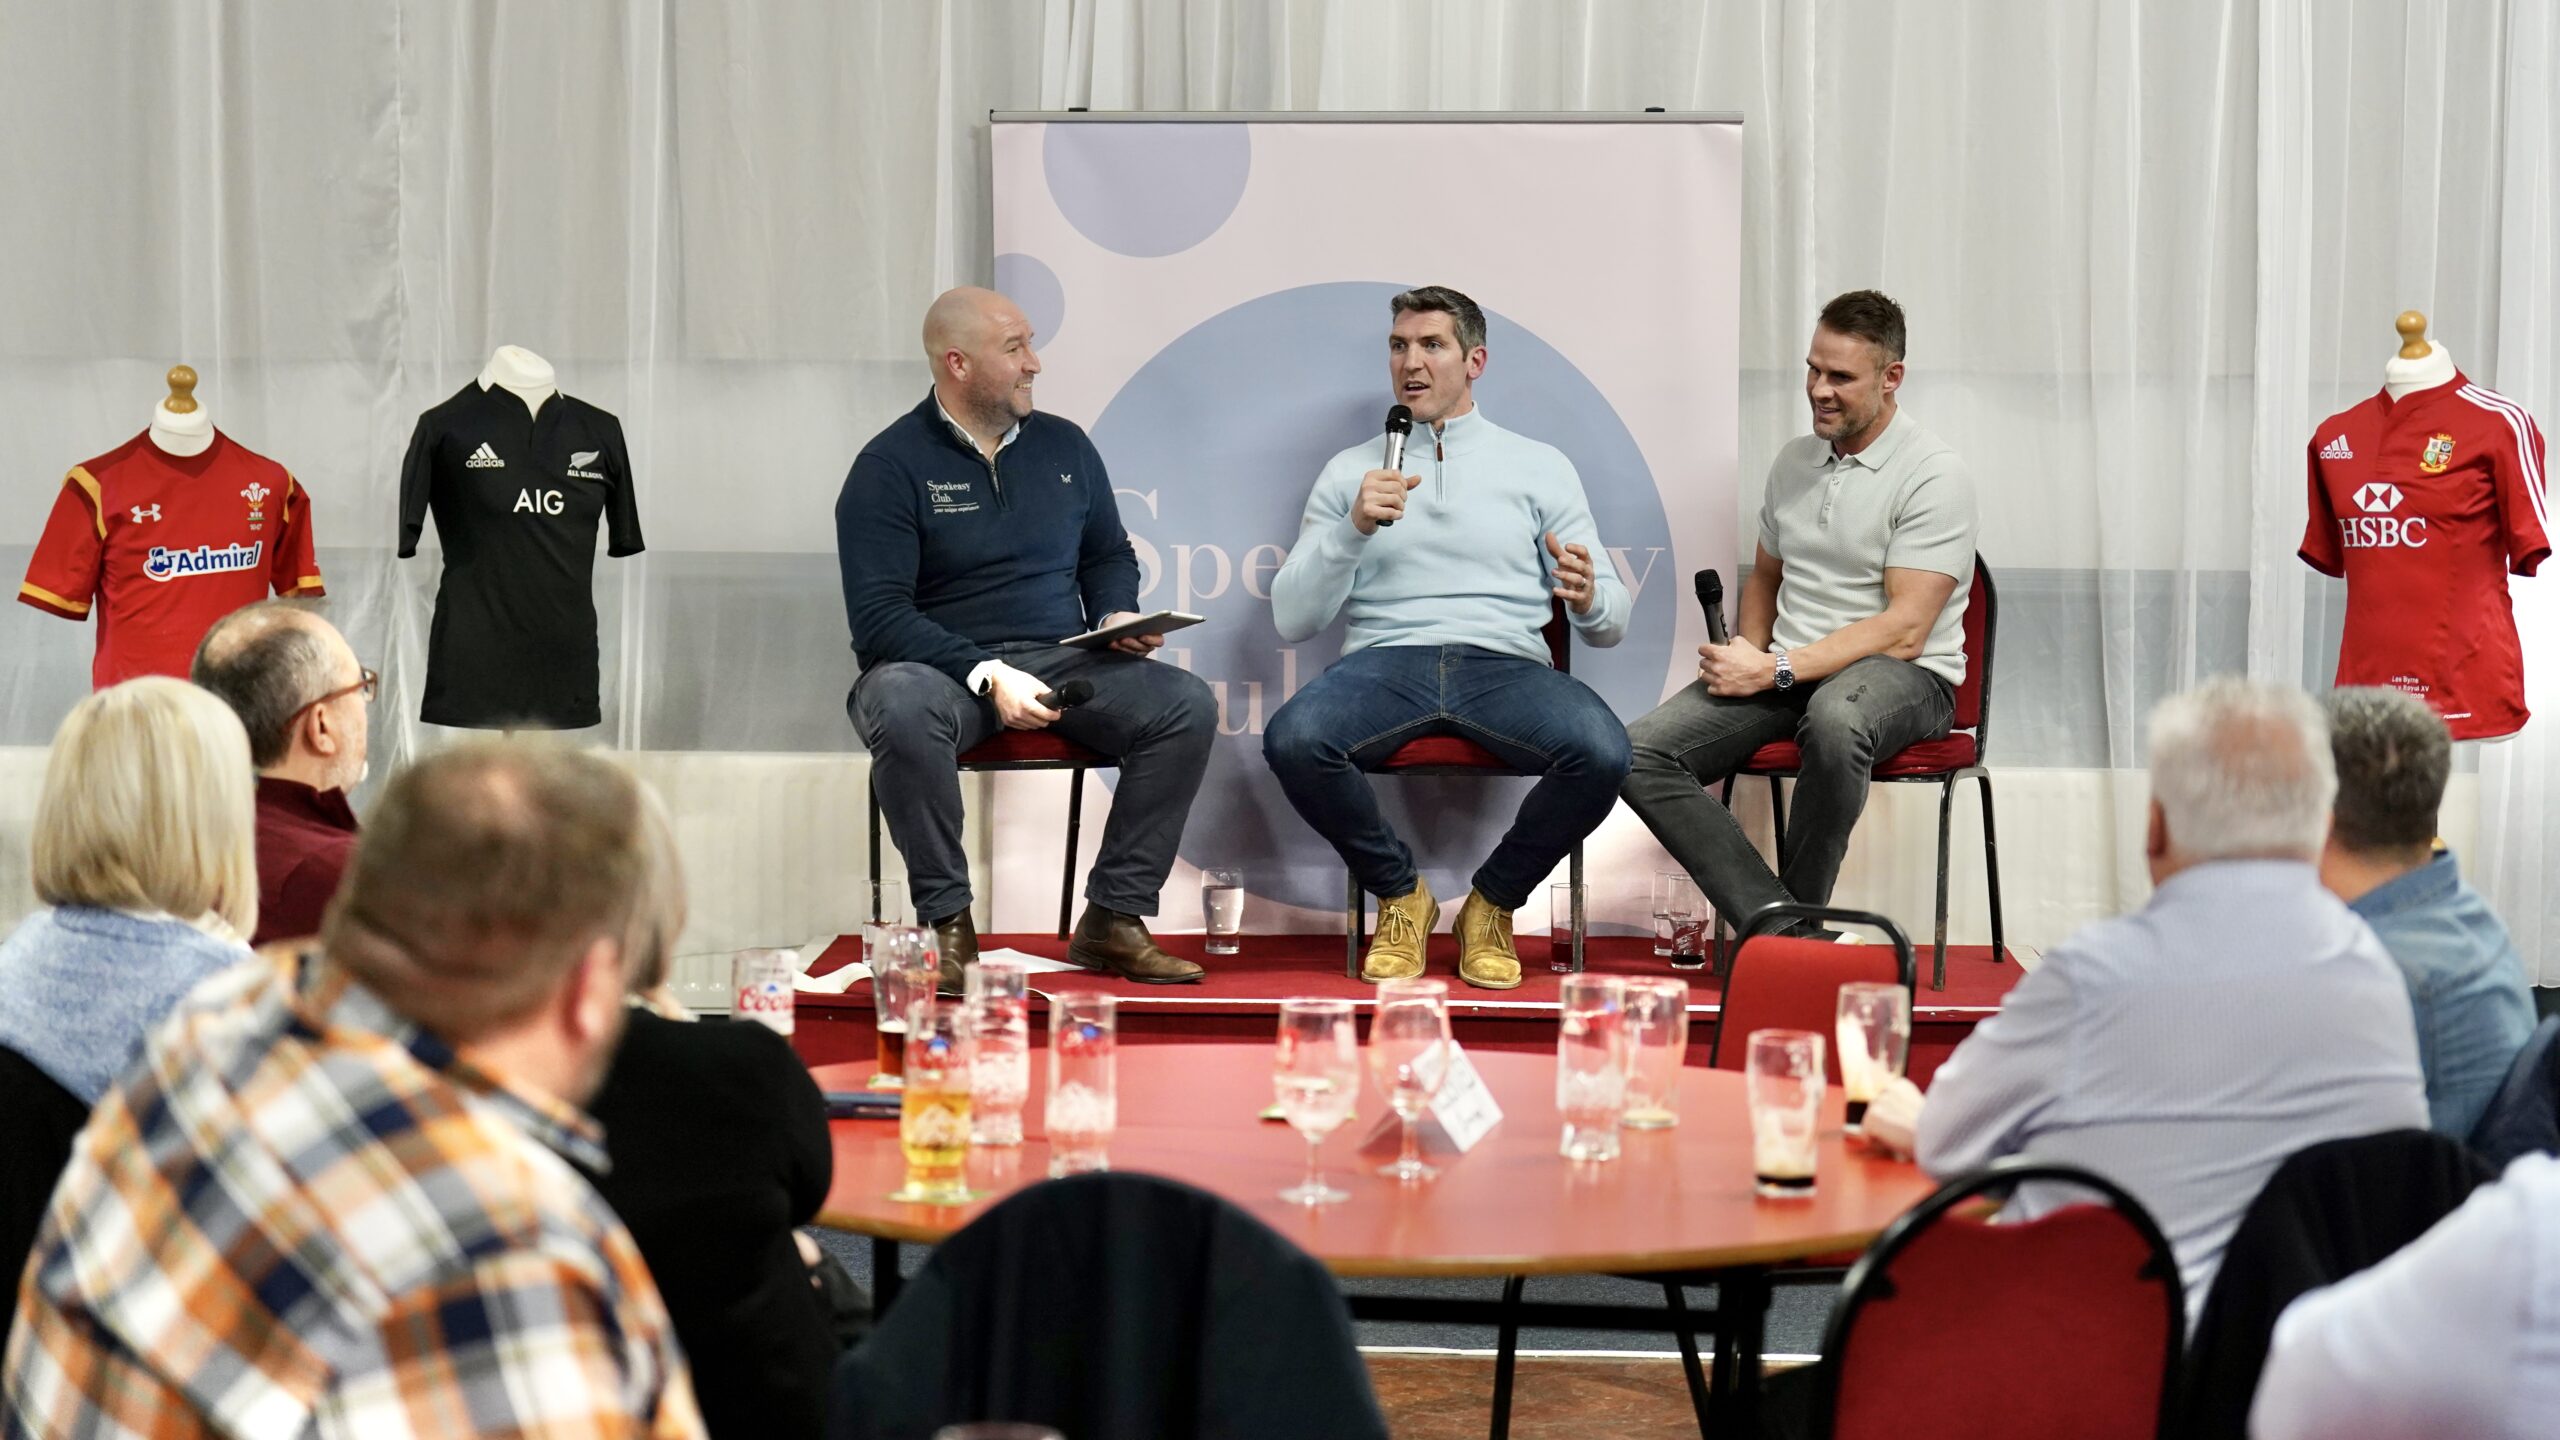 6 Nations Evening with James Hook & Lee Byrne, hosted by Llanharan RFC